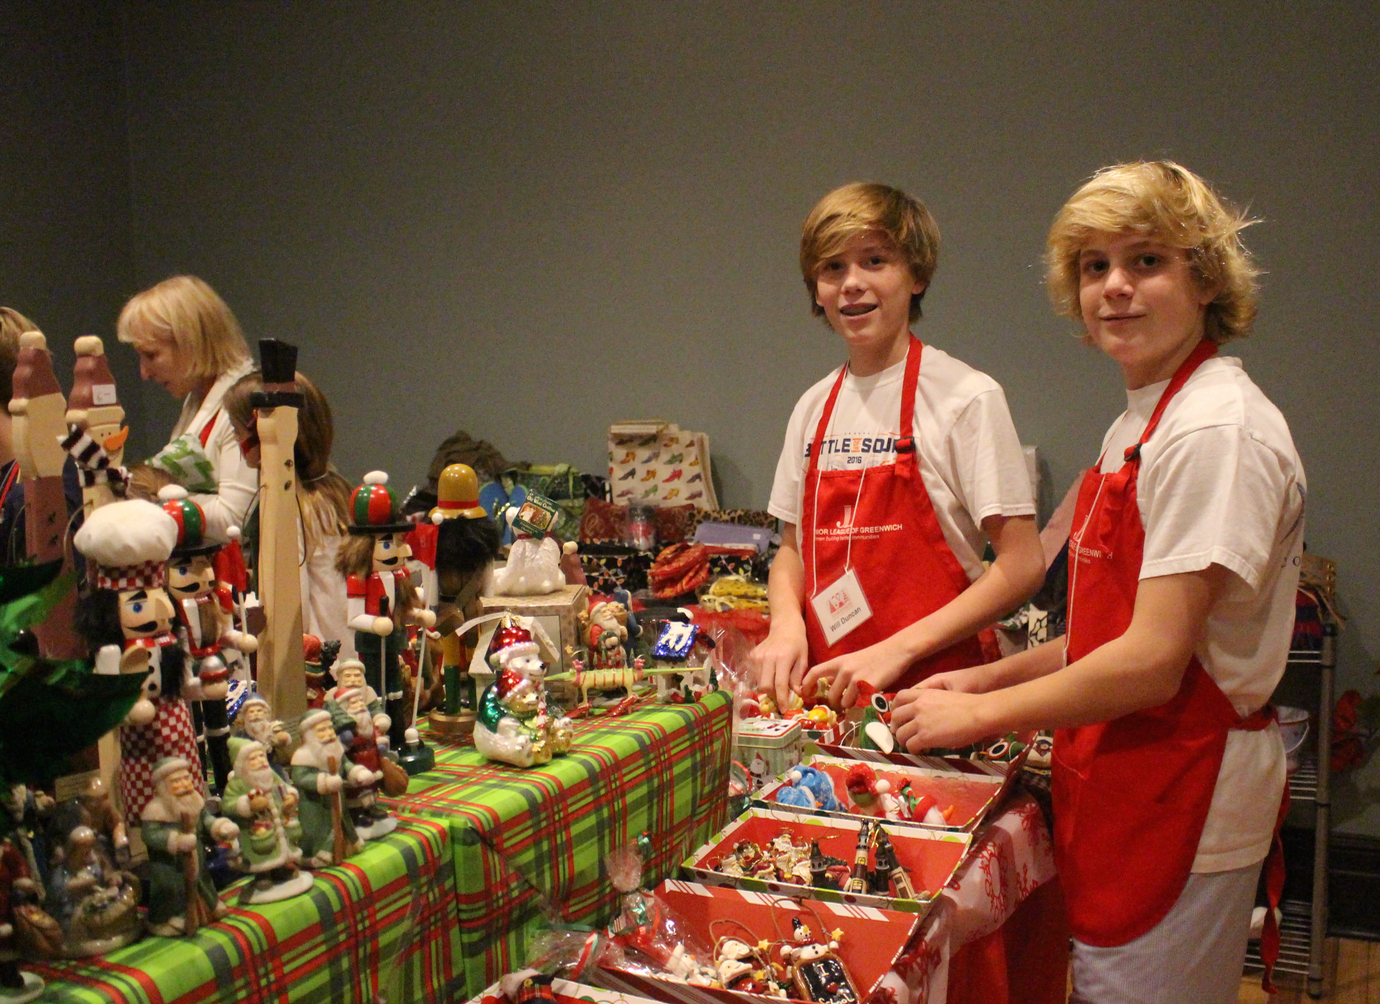 GCDS 7th graders Todd Rosenbaum and Will Duncan were busy in the Children's Giving Shop at the Enchanted Forest. The boys helped children pick out presents. Photo: Leslie Yager